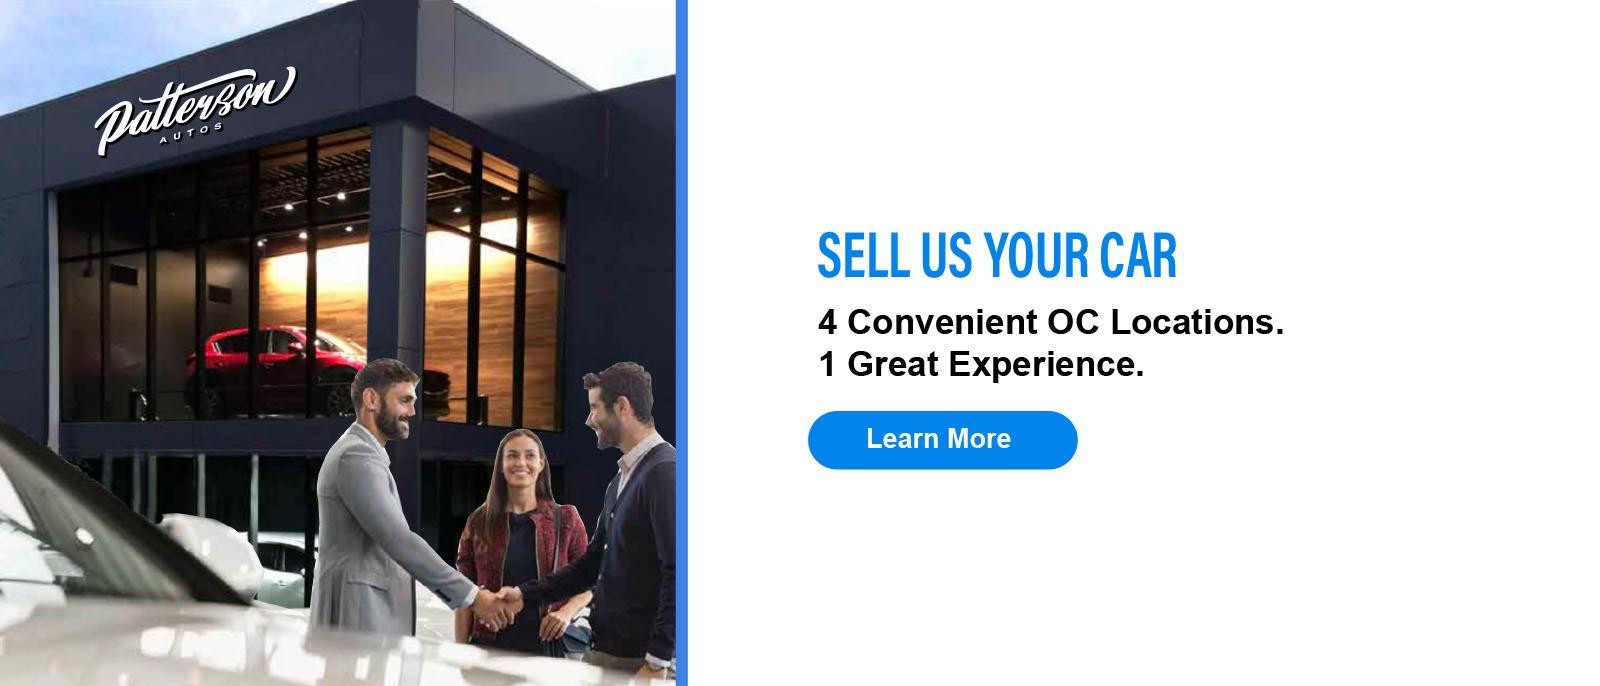 SELL US YOUR CAR 4 Convenient OC Locations. 1 Great Experience.